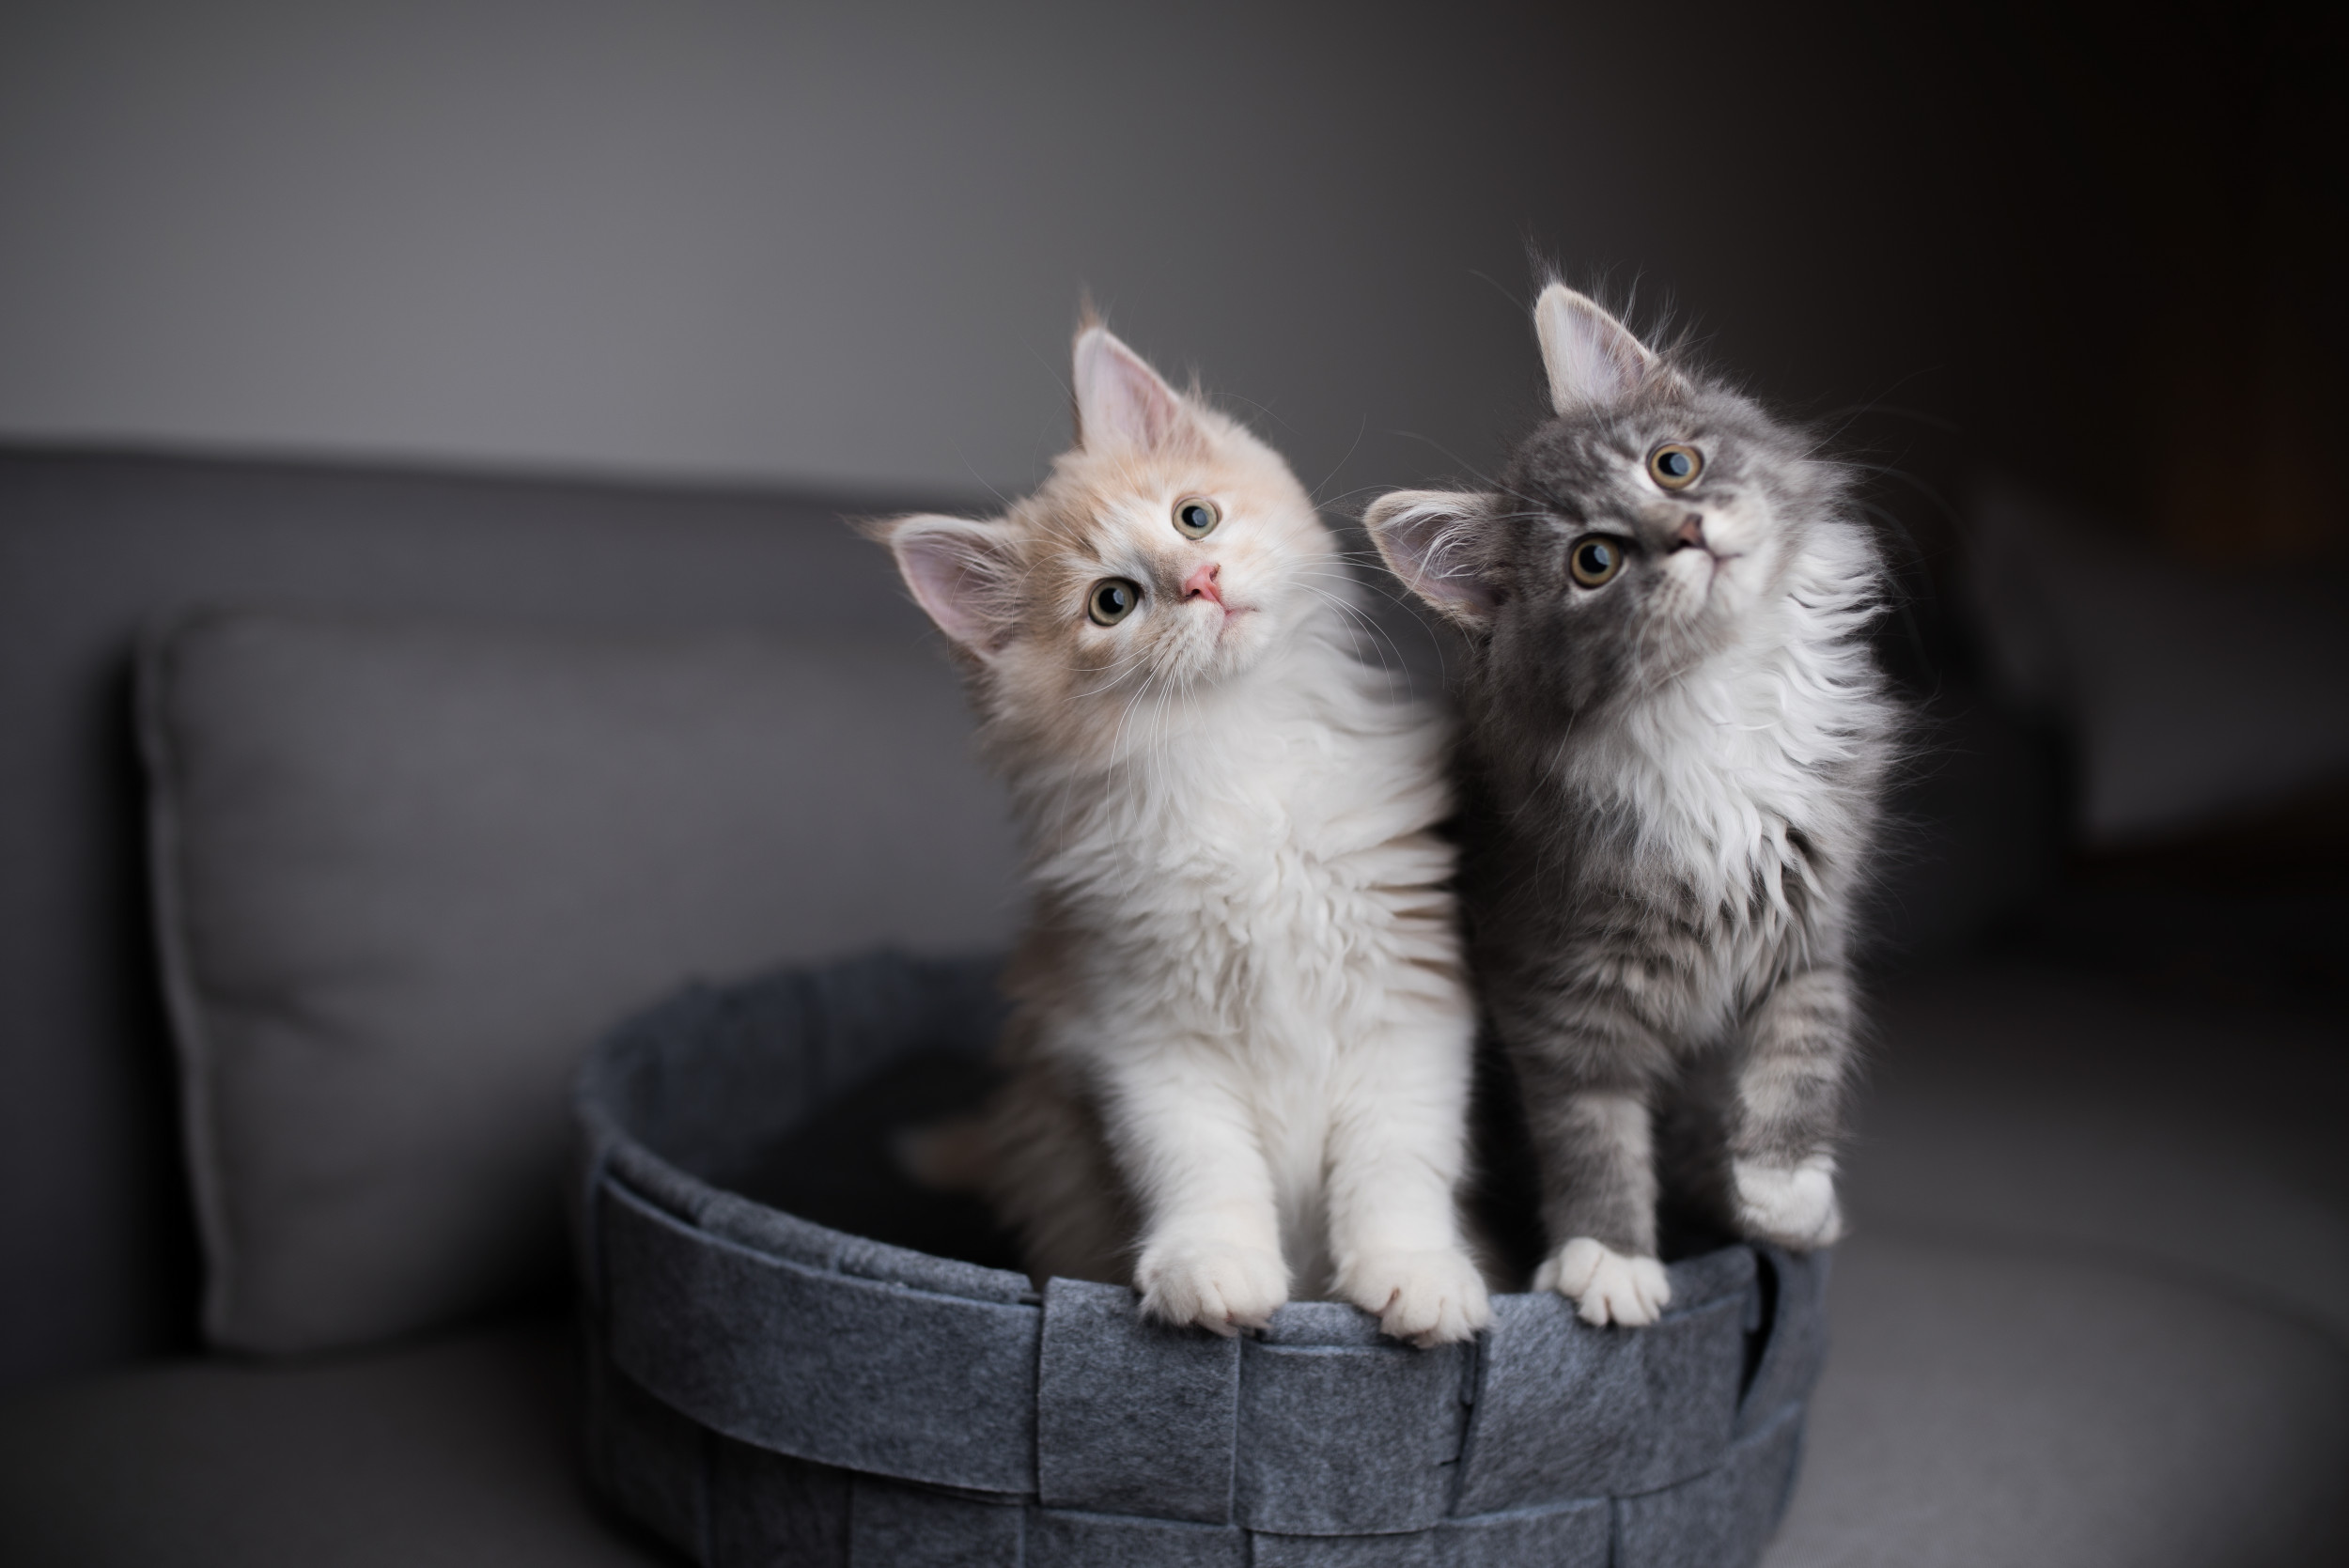 How did kittens get their name?